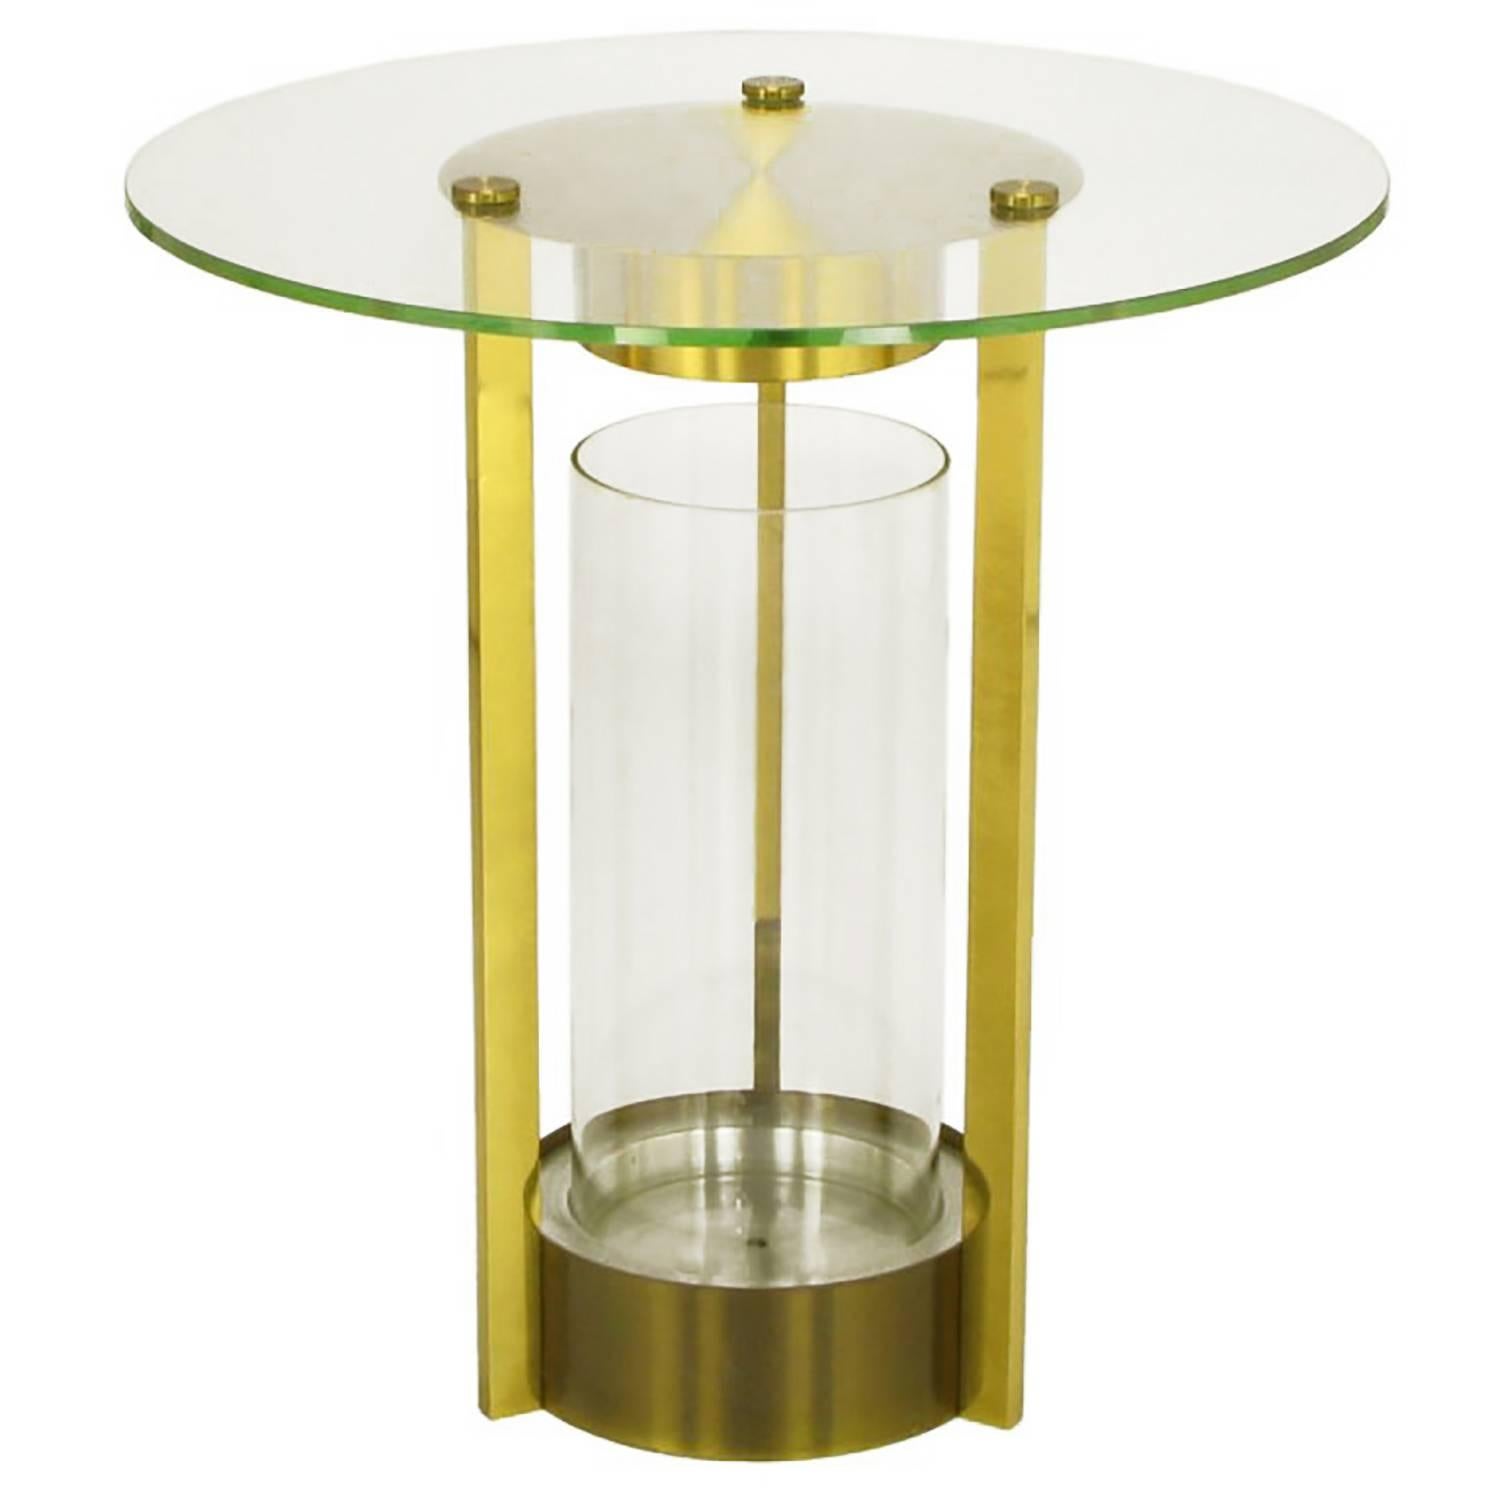 Illuminated Brass and Glass Cylindrical End Table, Dorothy Thorpe Attributed